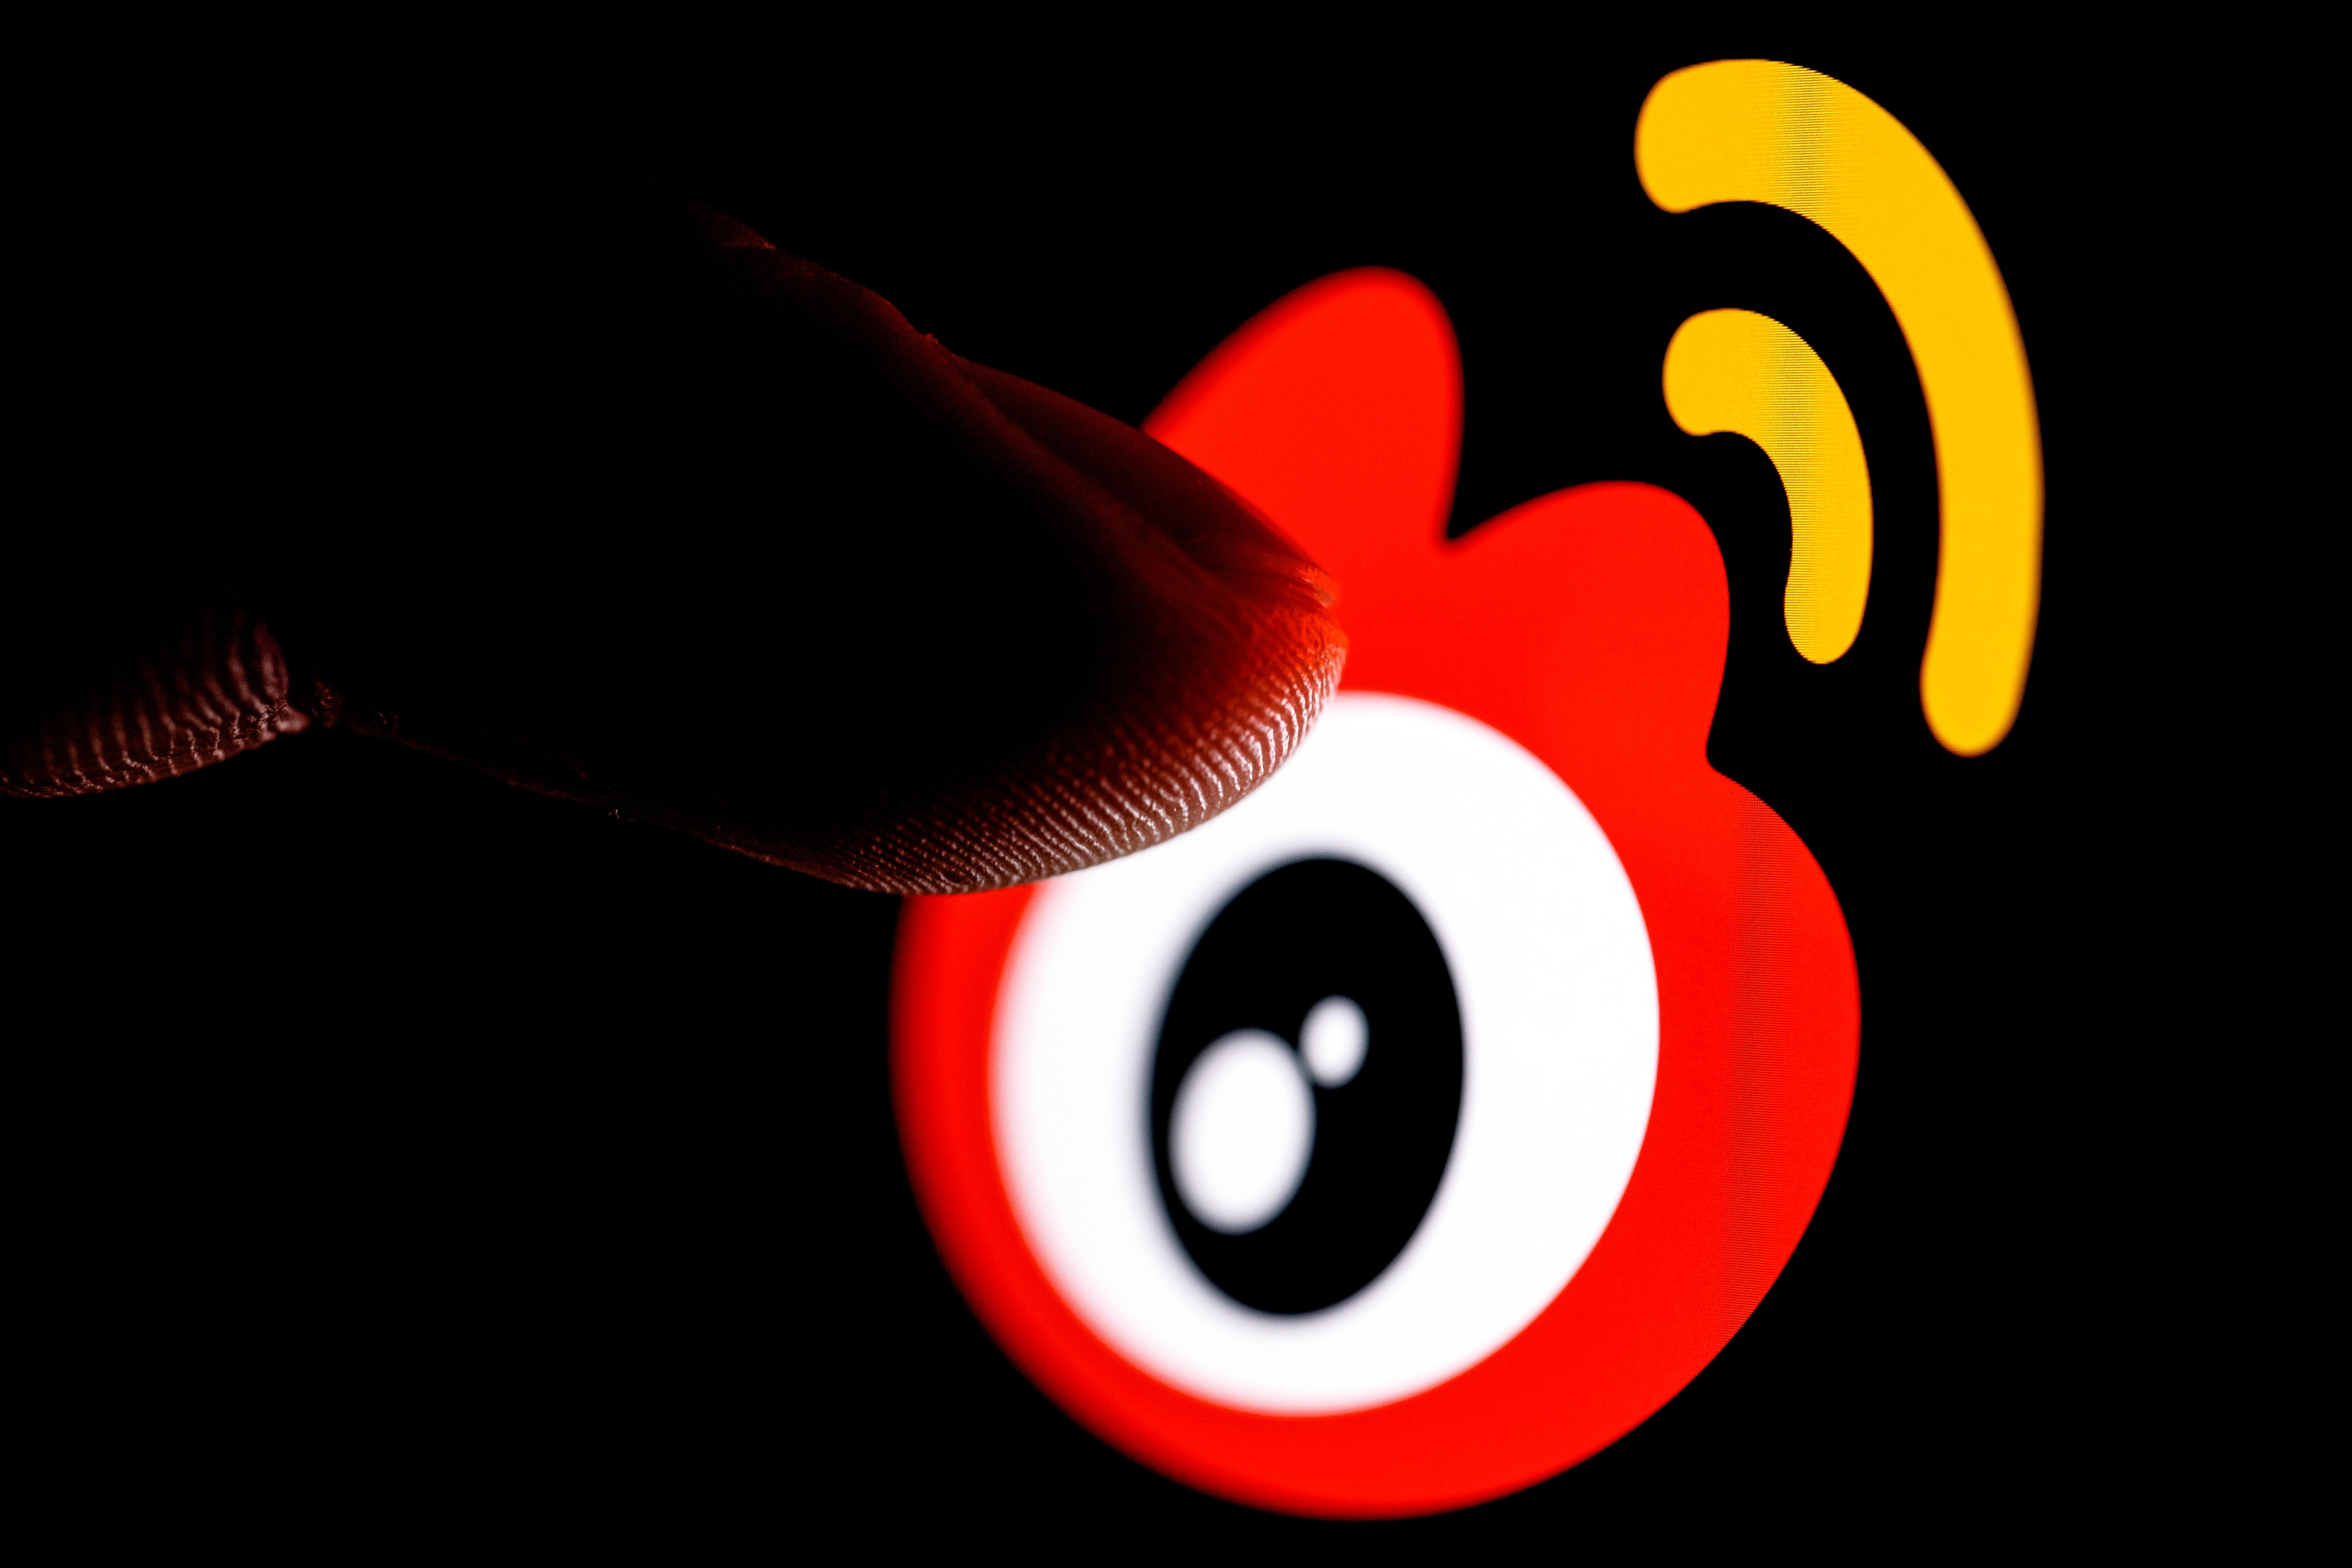 Kazan, Russia - Mar 10, 2022: The finger reaches for Weibo chinese microblogging service logo on smartphone screen.